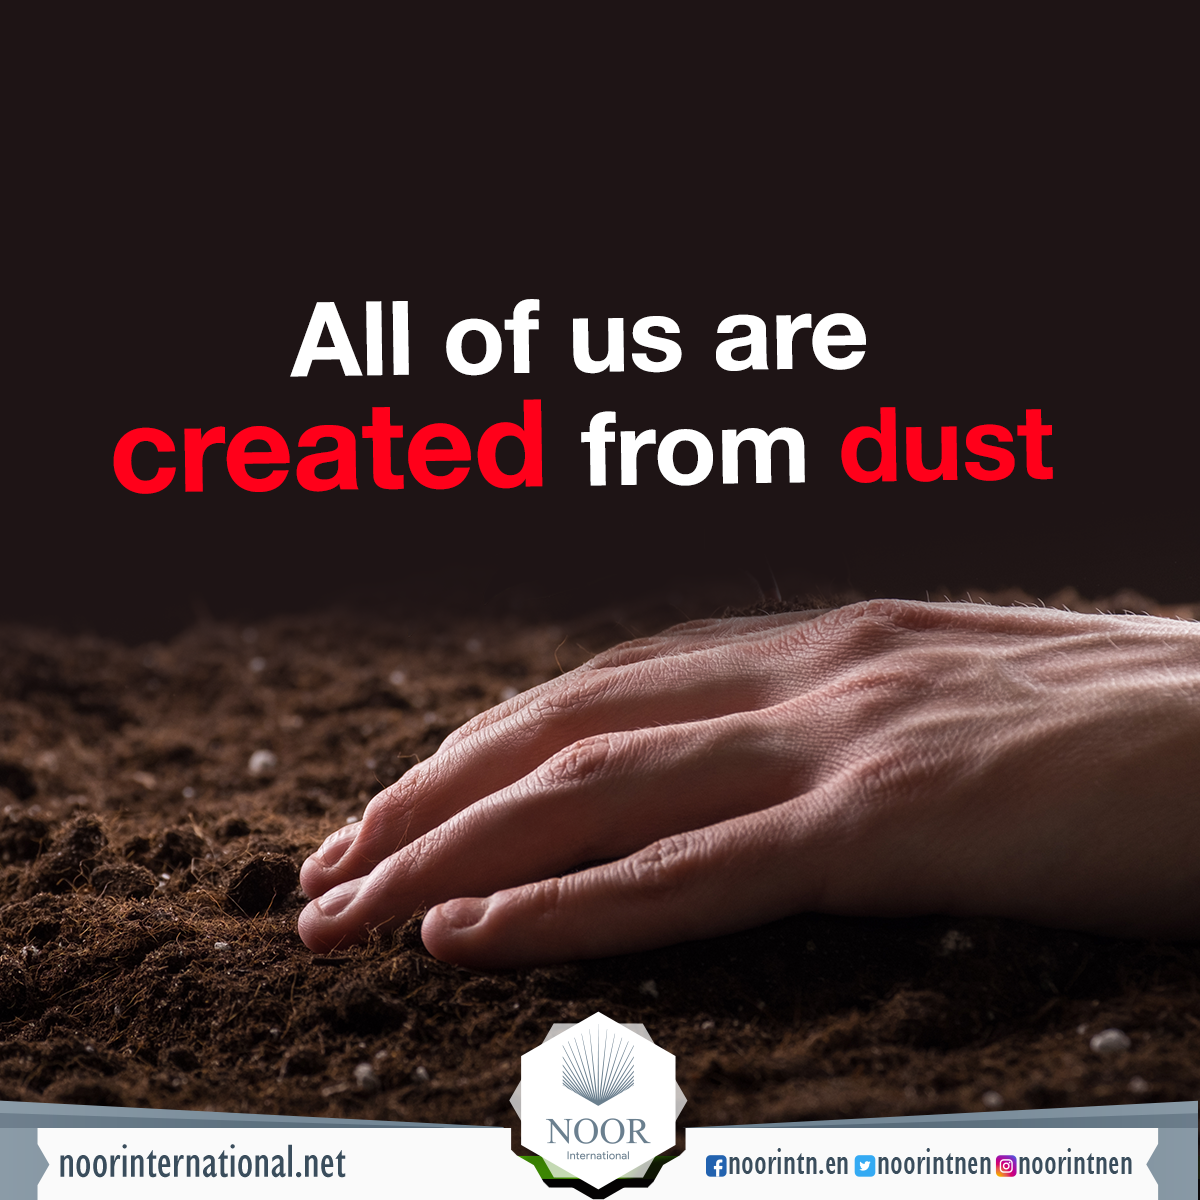 All of us are created from dust.